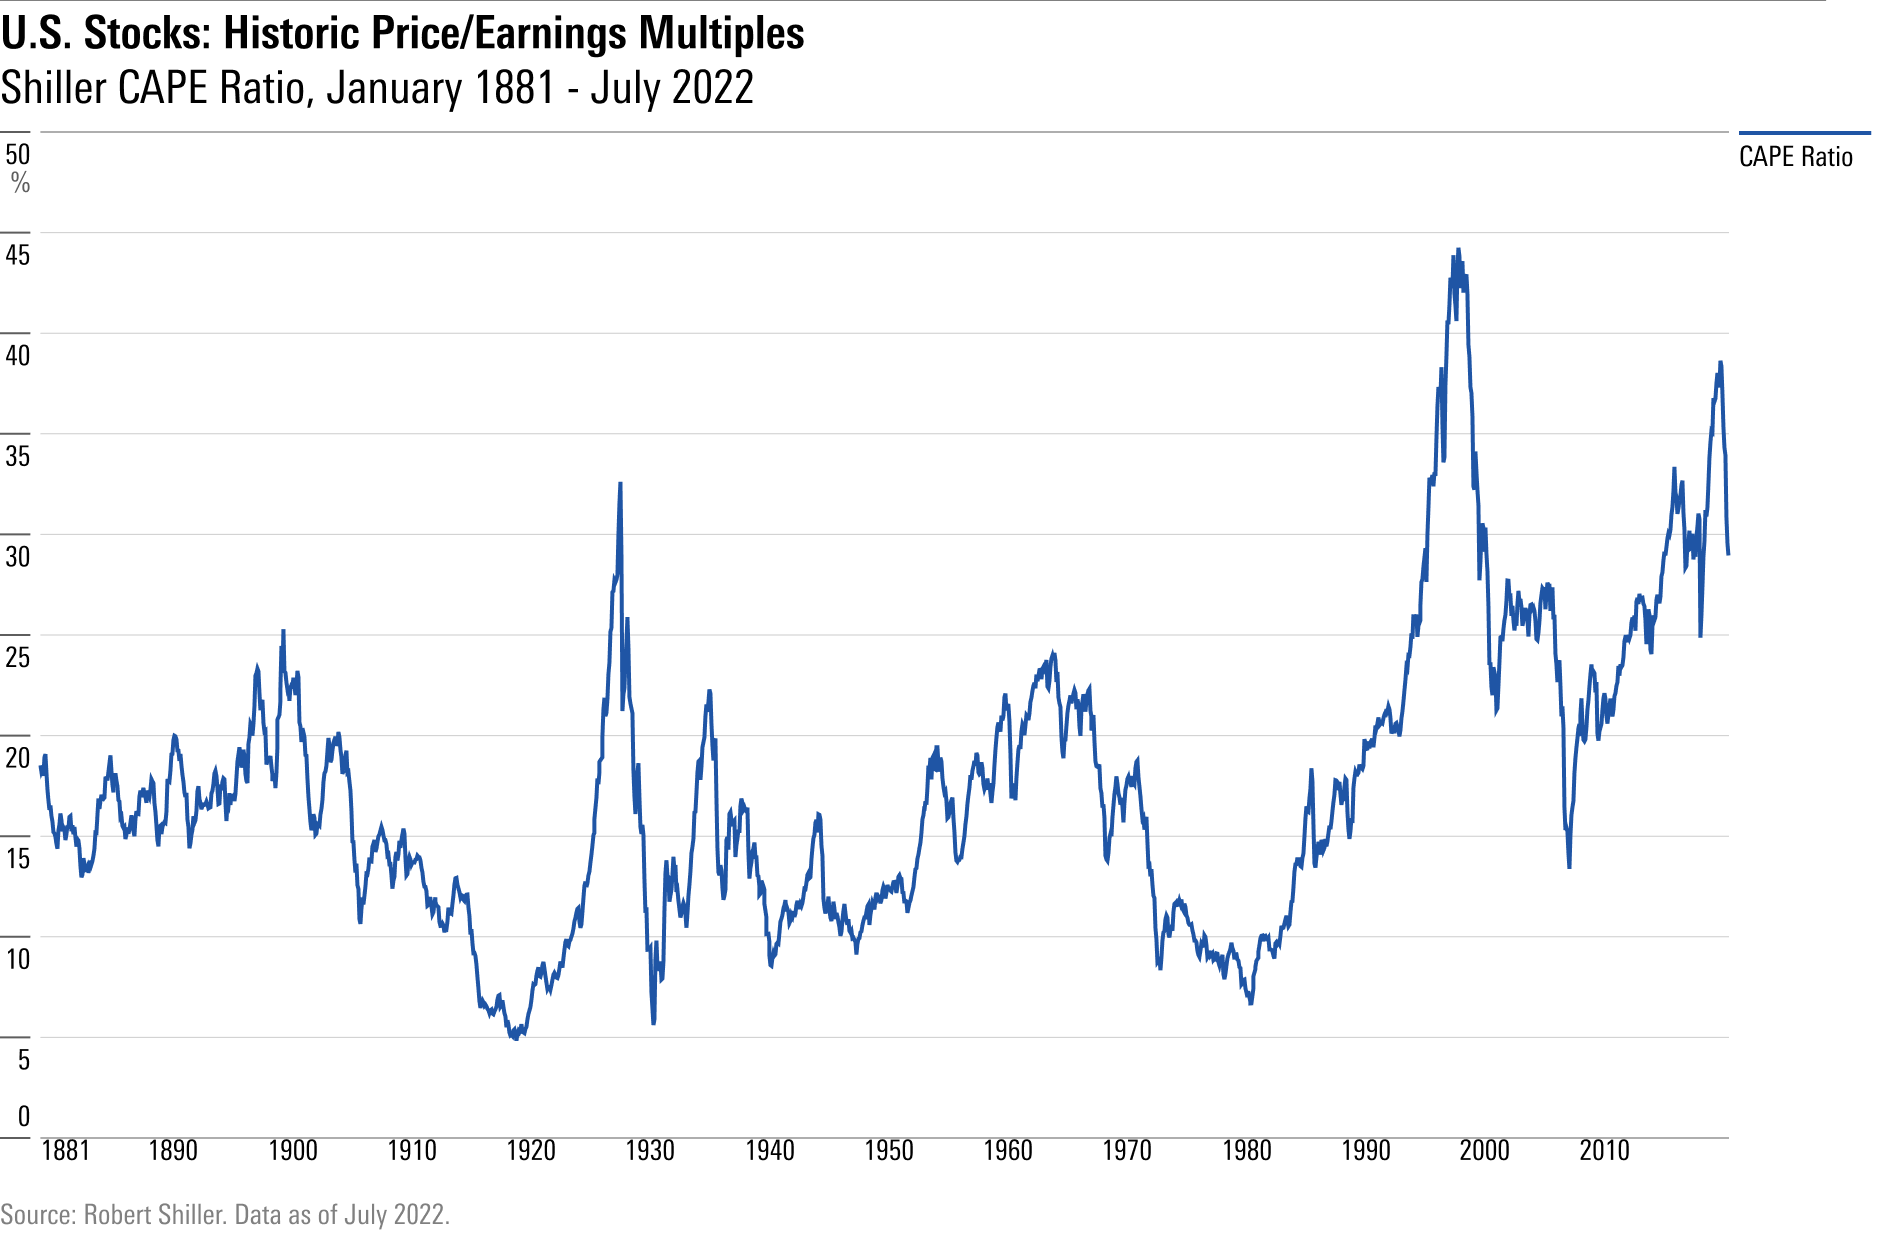 The Schiller CAPE Ratio for U.S. Stocks, calculated monthly since 1871.